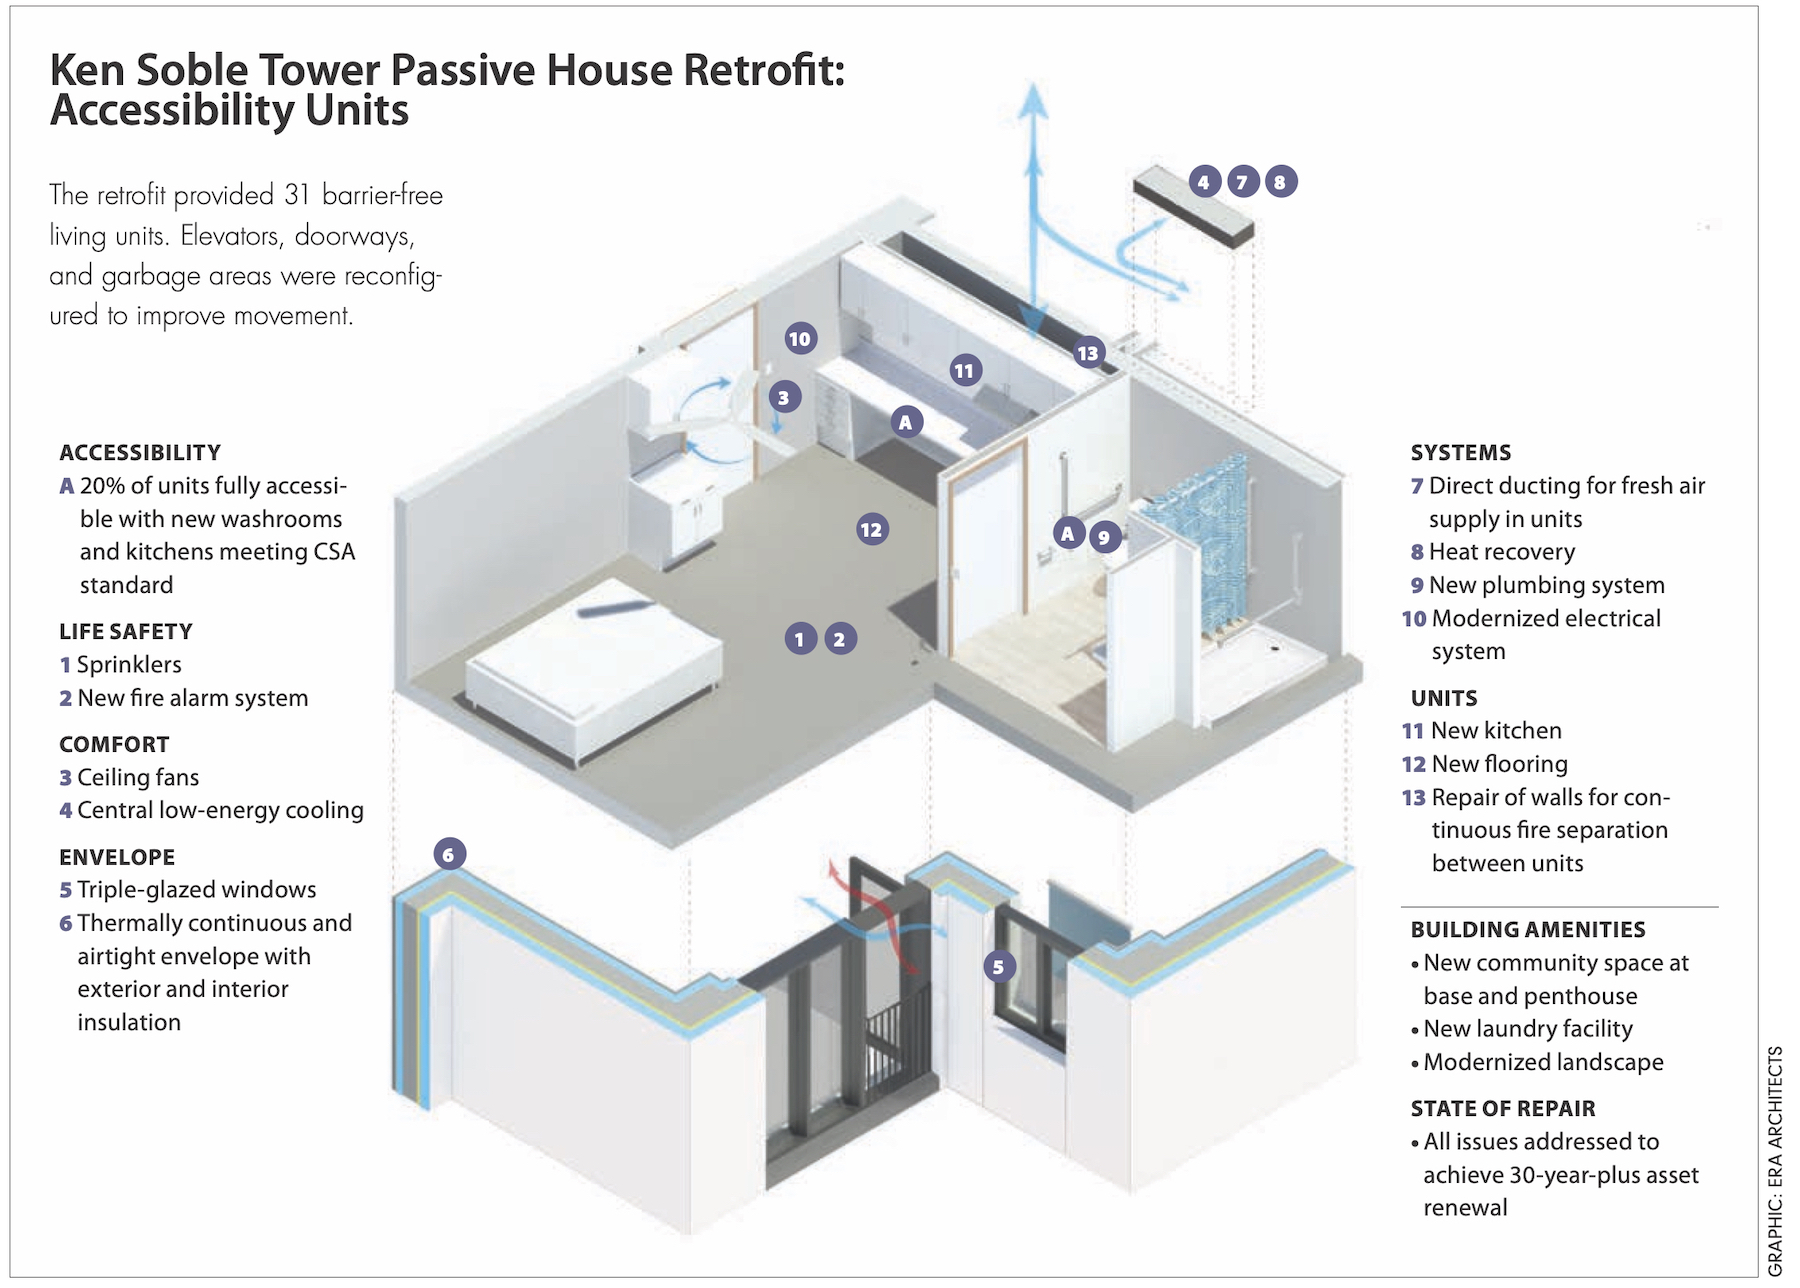 Ken Soble Tower becomes world’s largest residential Passive House retrofit 2.jpg